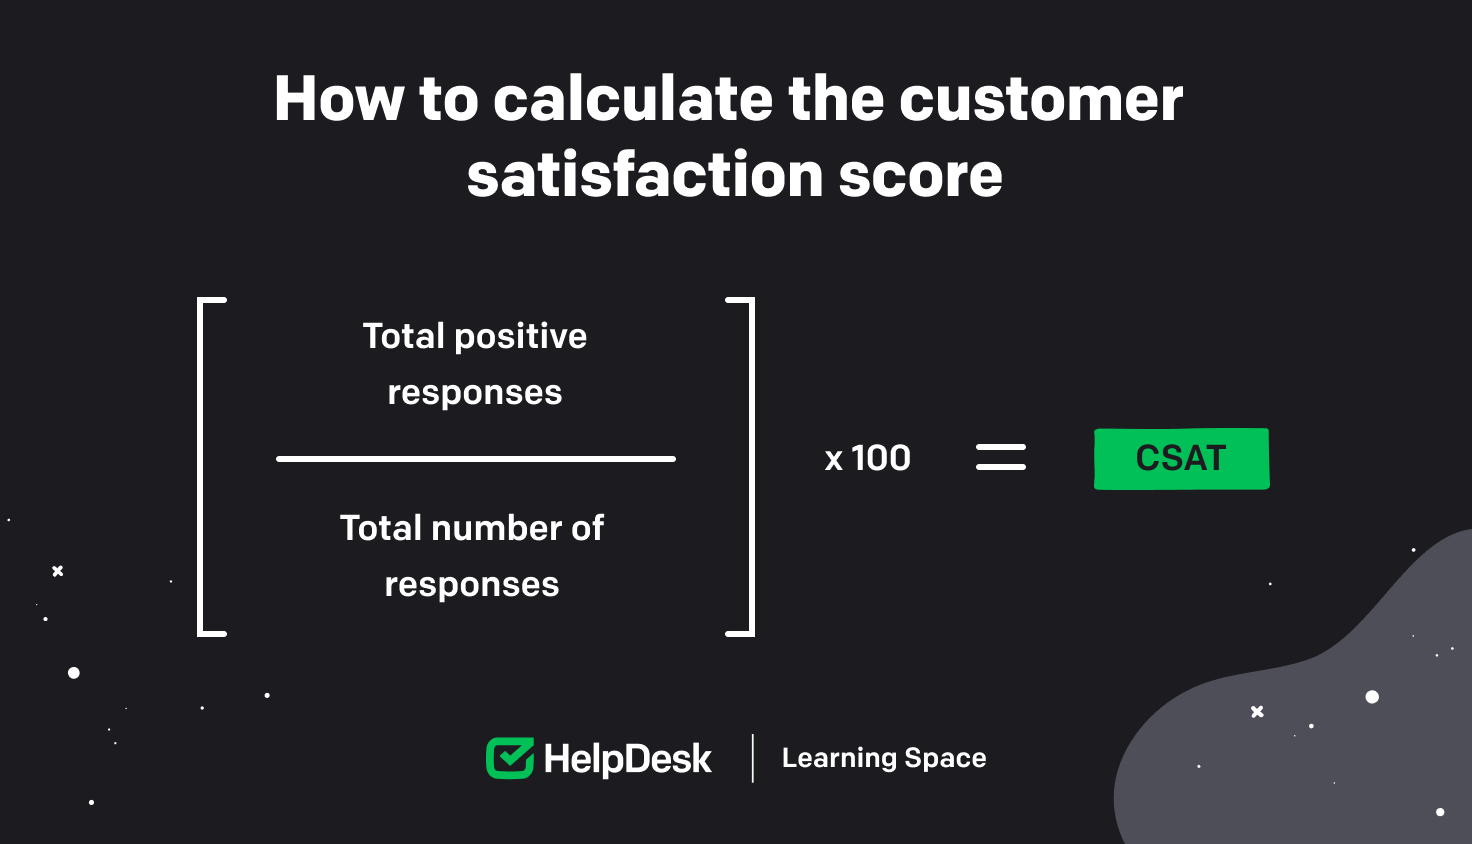 Calculation of the customer satisfaction score.